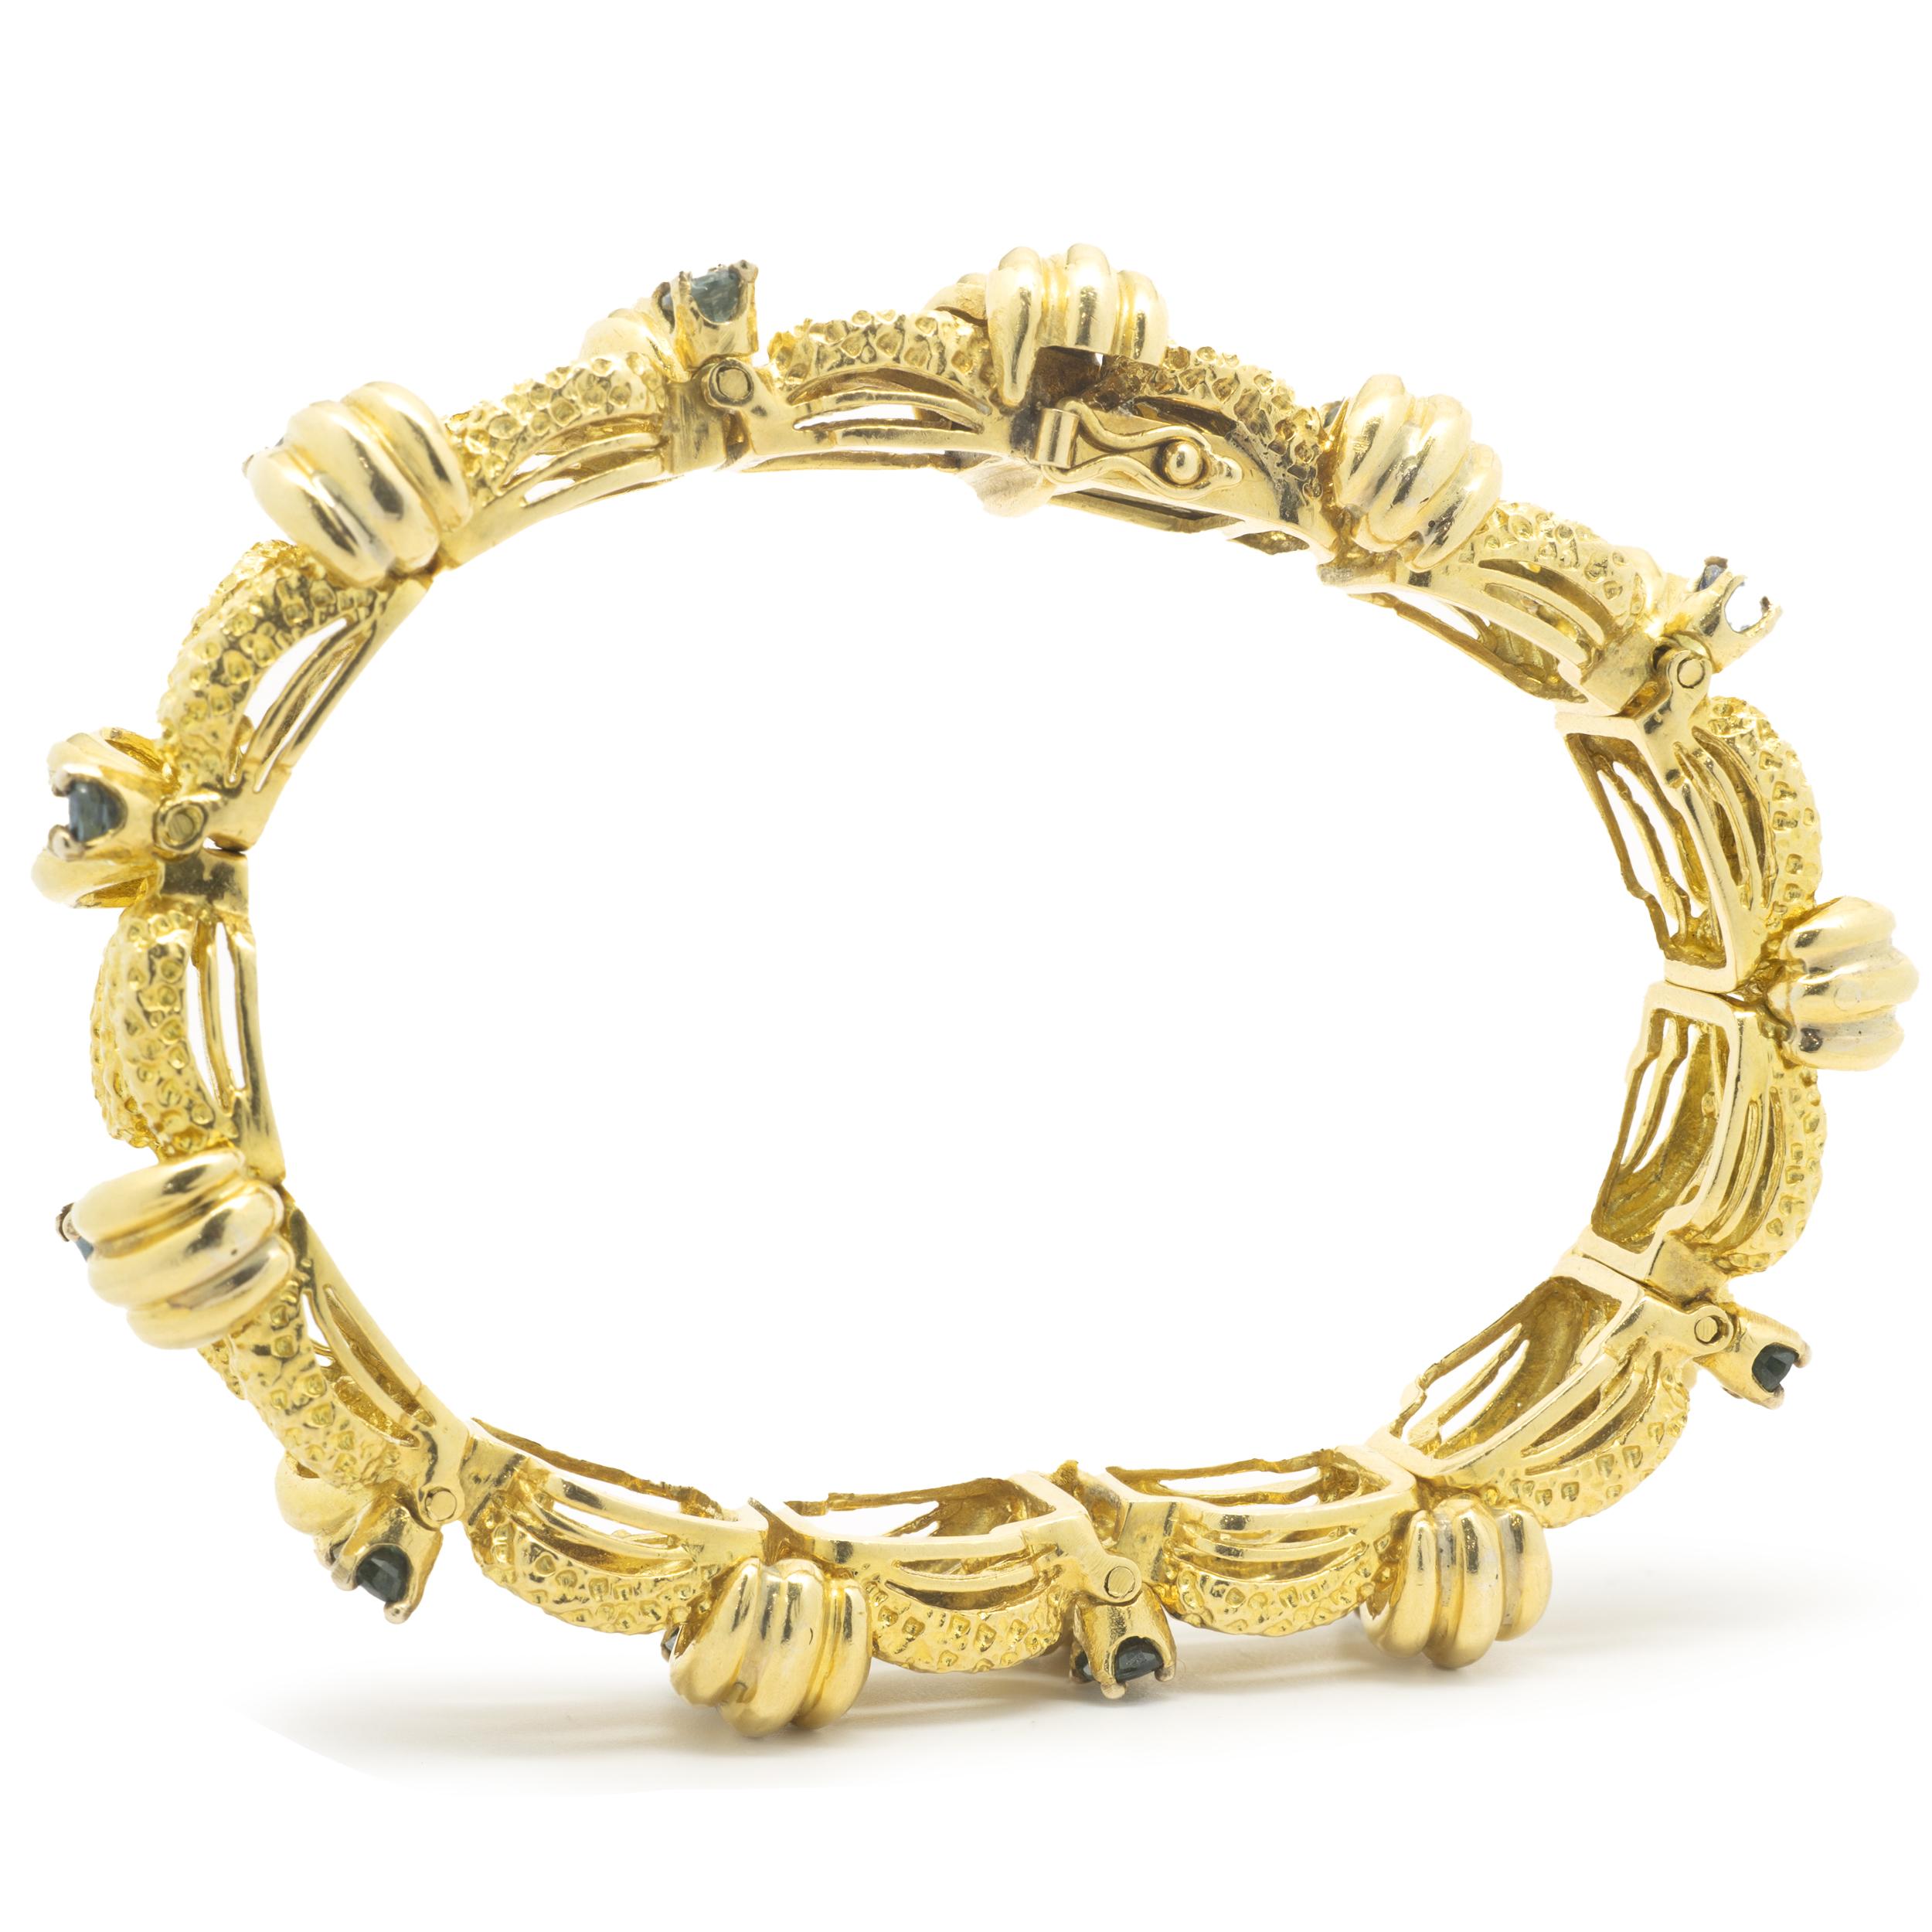 Designer: Tiffany & Co. 
Material: 18K yellow gold
Sapphire: 12 oval cut = 1.92cttw
Dimensions: bracelet measure 7-inches long, 13mm wide
Weight: 59.48 grams
